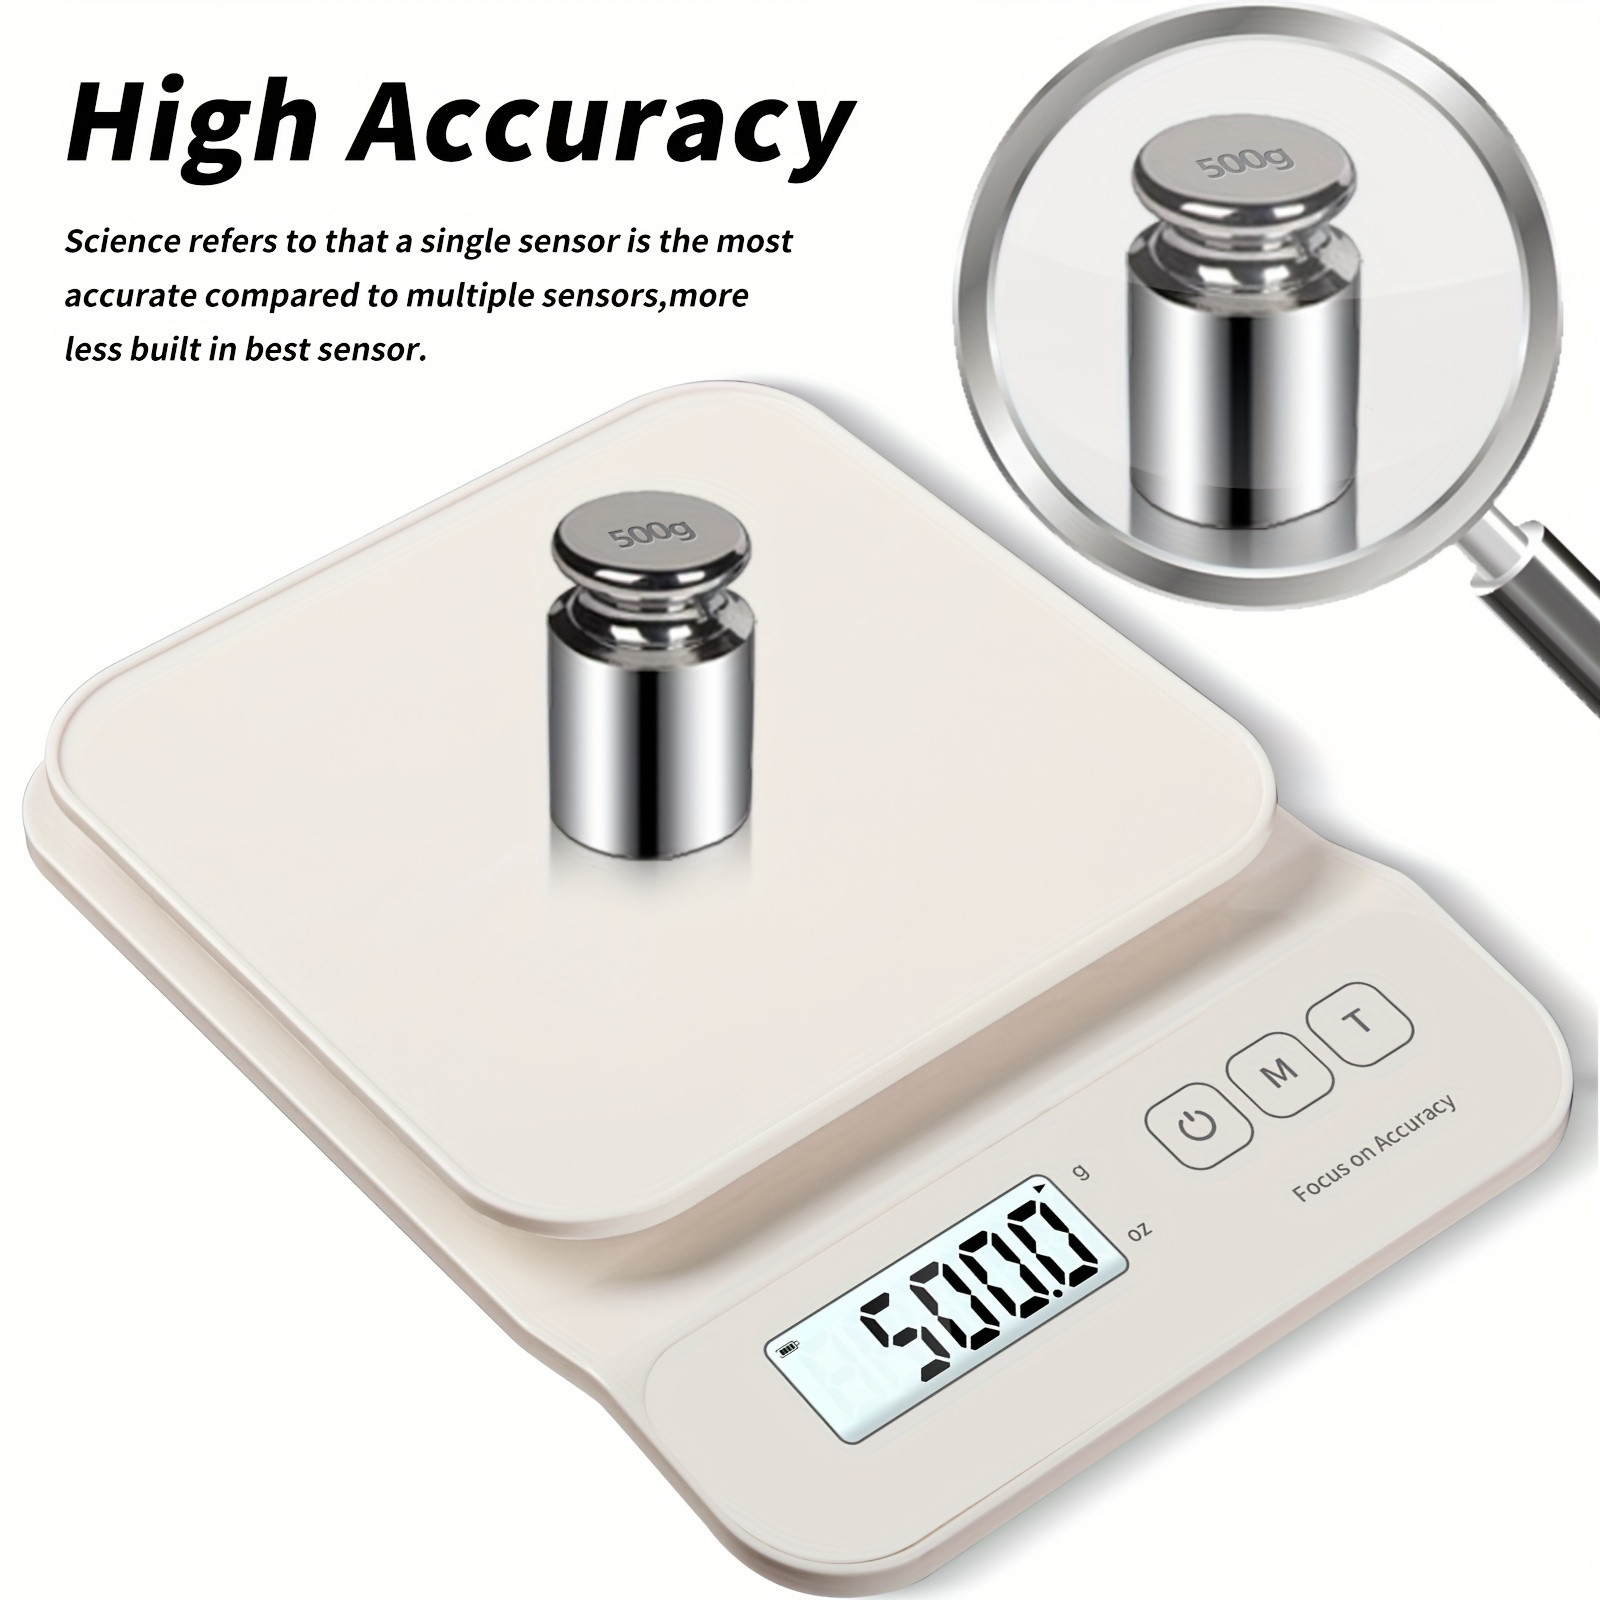 Digital Kitchen Scale, Portable Food Scale With Removable Tray, Small Scale  With Tare Function, Gram And Ounce Scale For Cooking, Meal Prep, Coffee